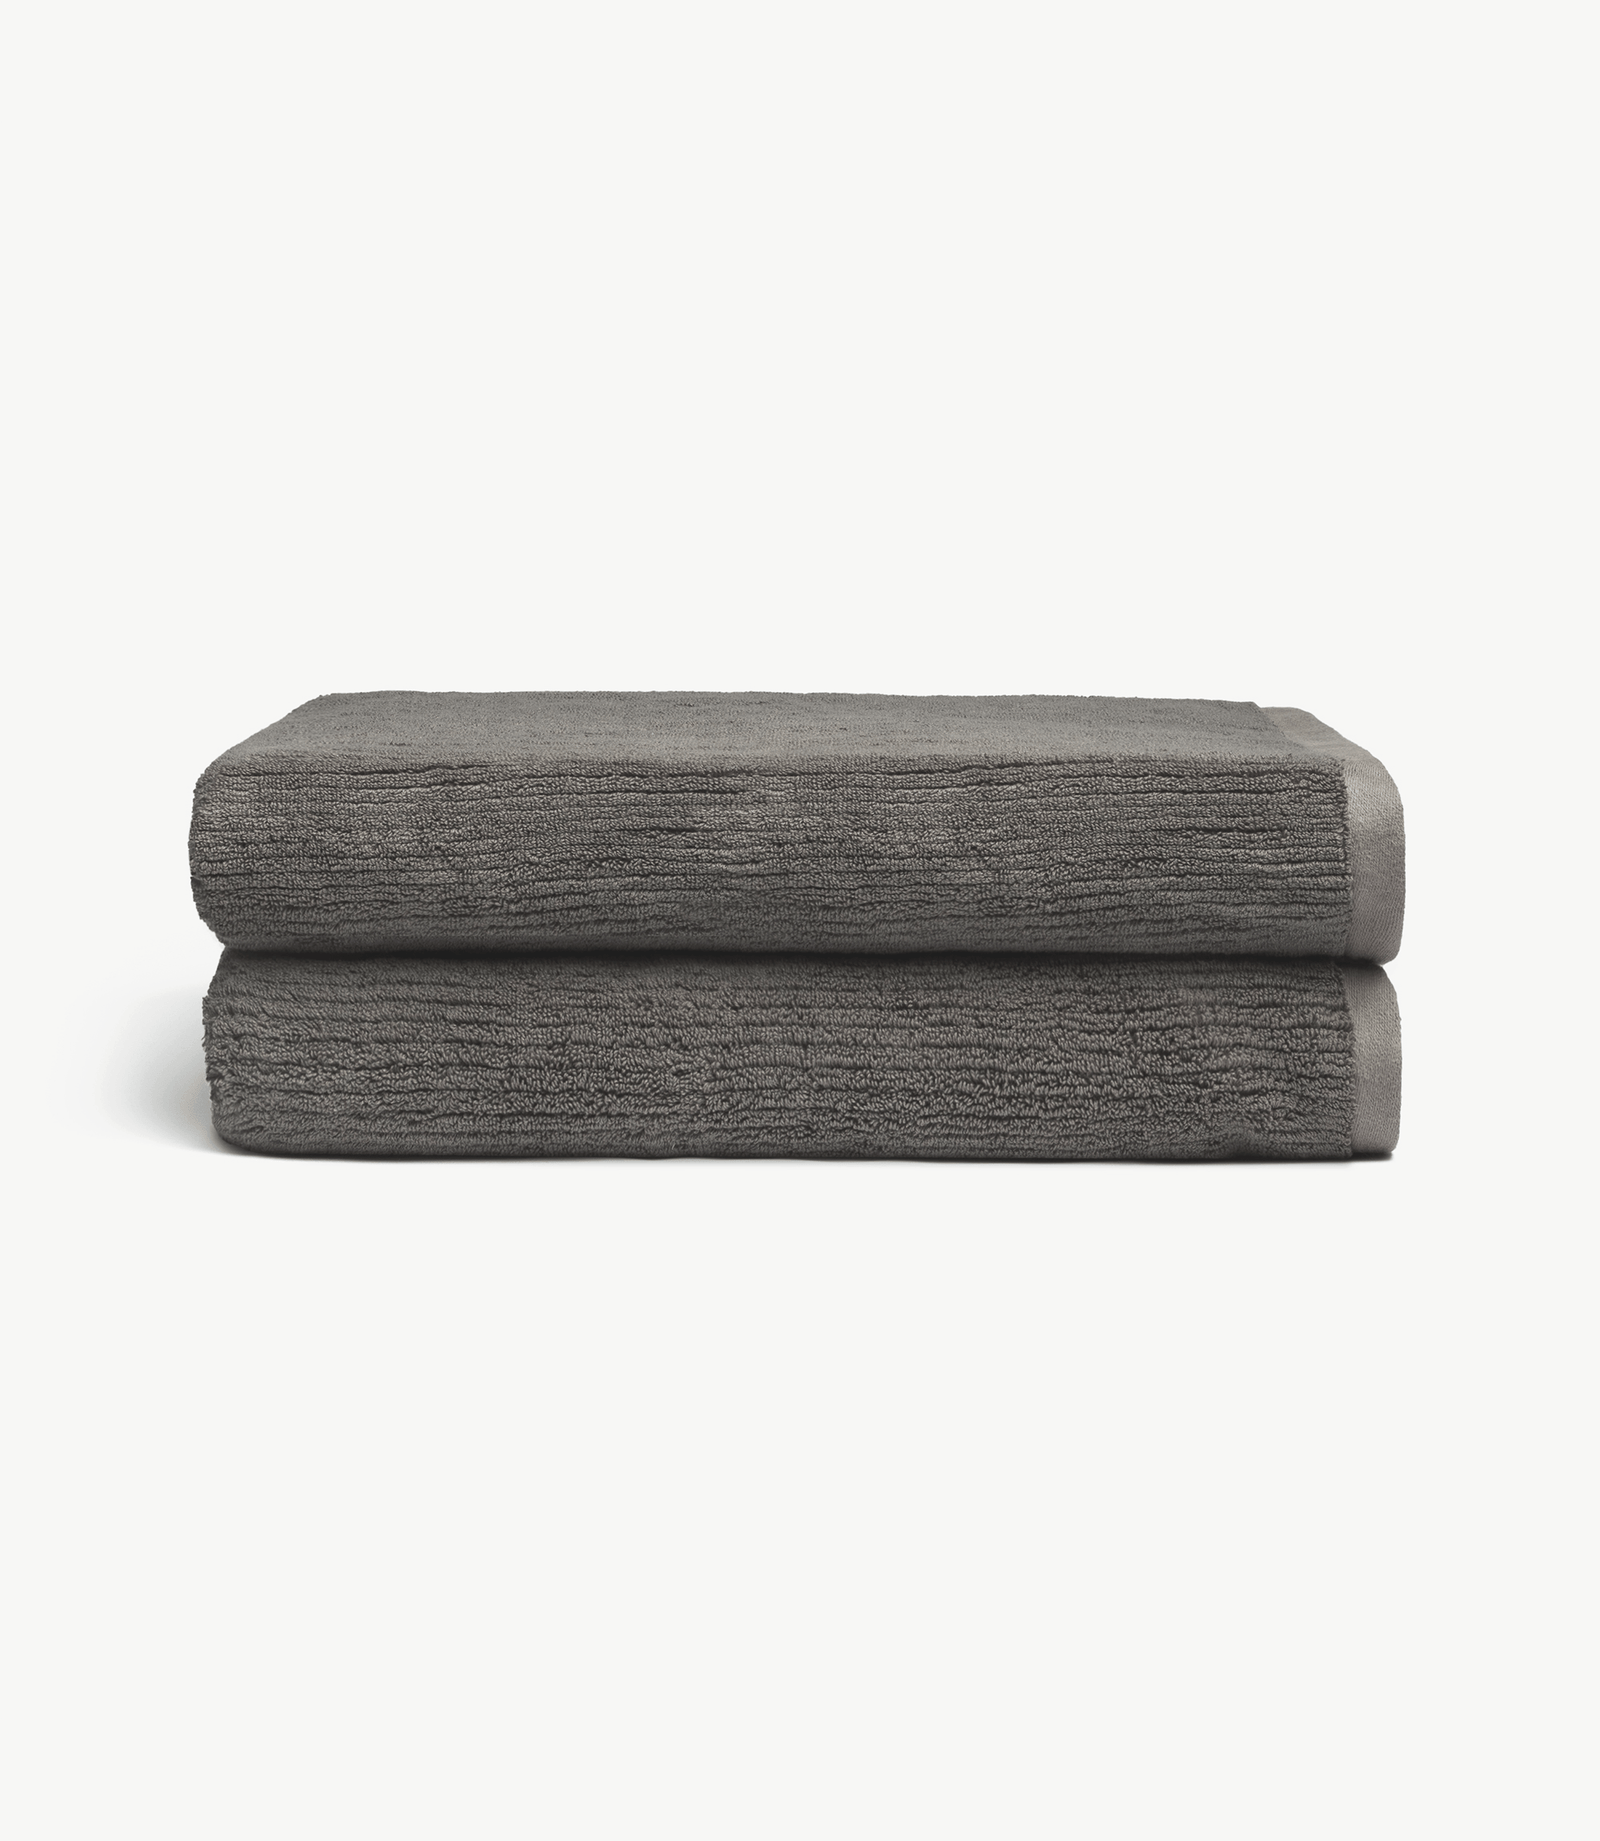 Ribbed Terry Bath Sheets in the color Charcoal. Photo of product taken with white background. 